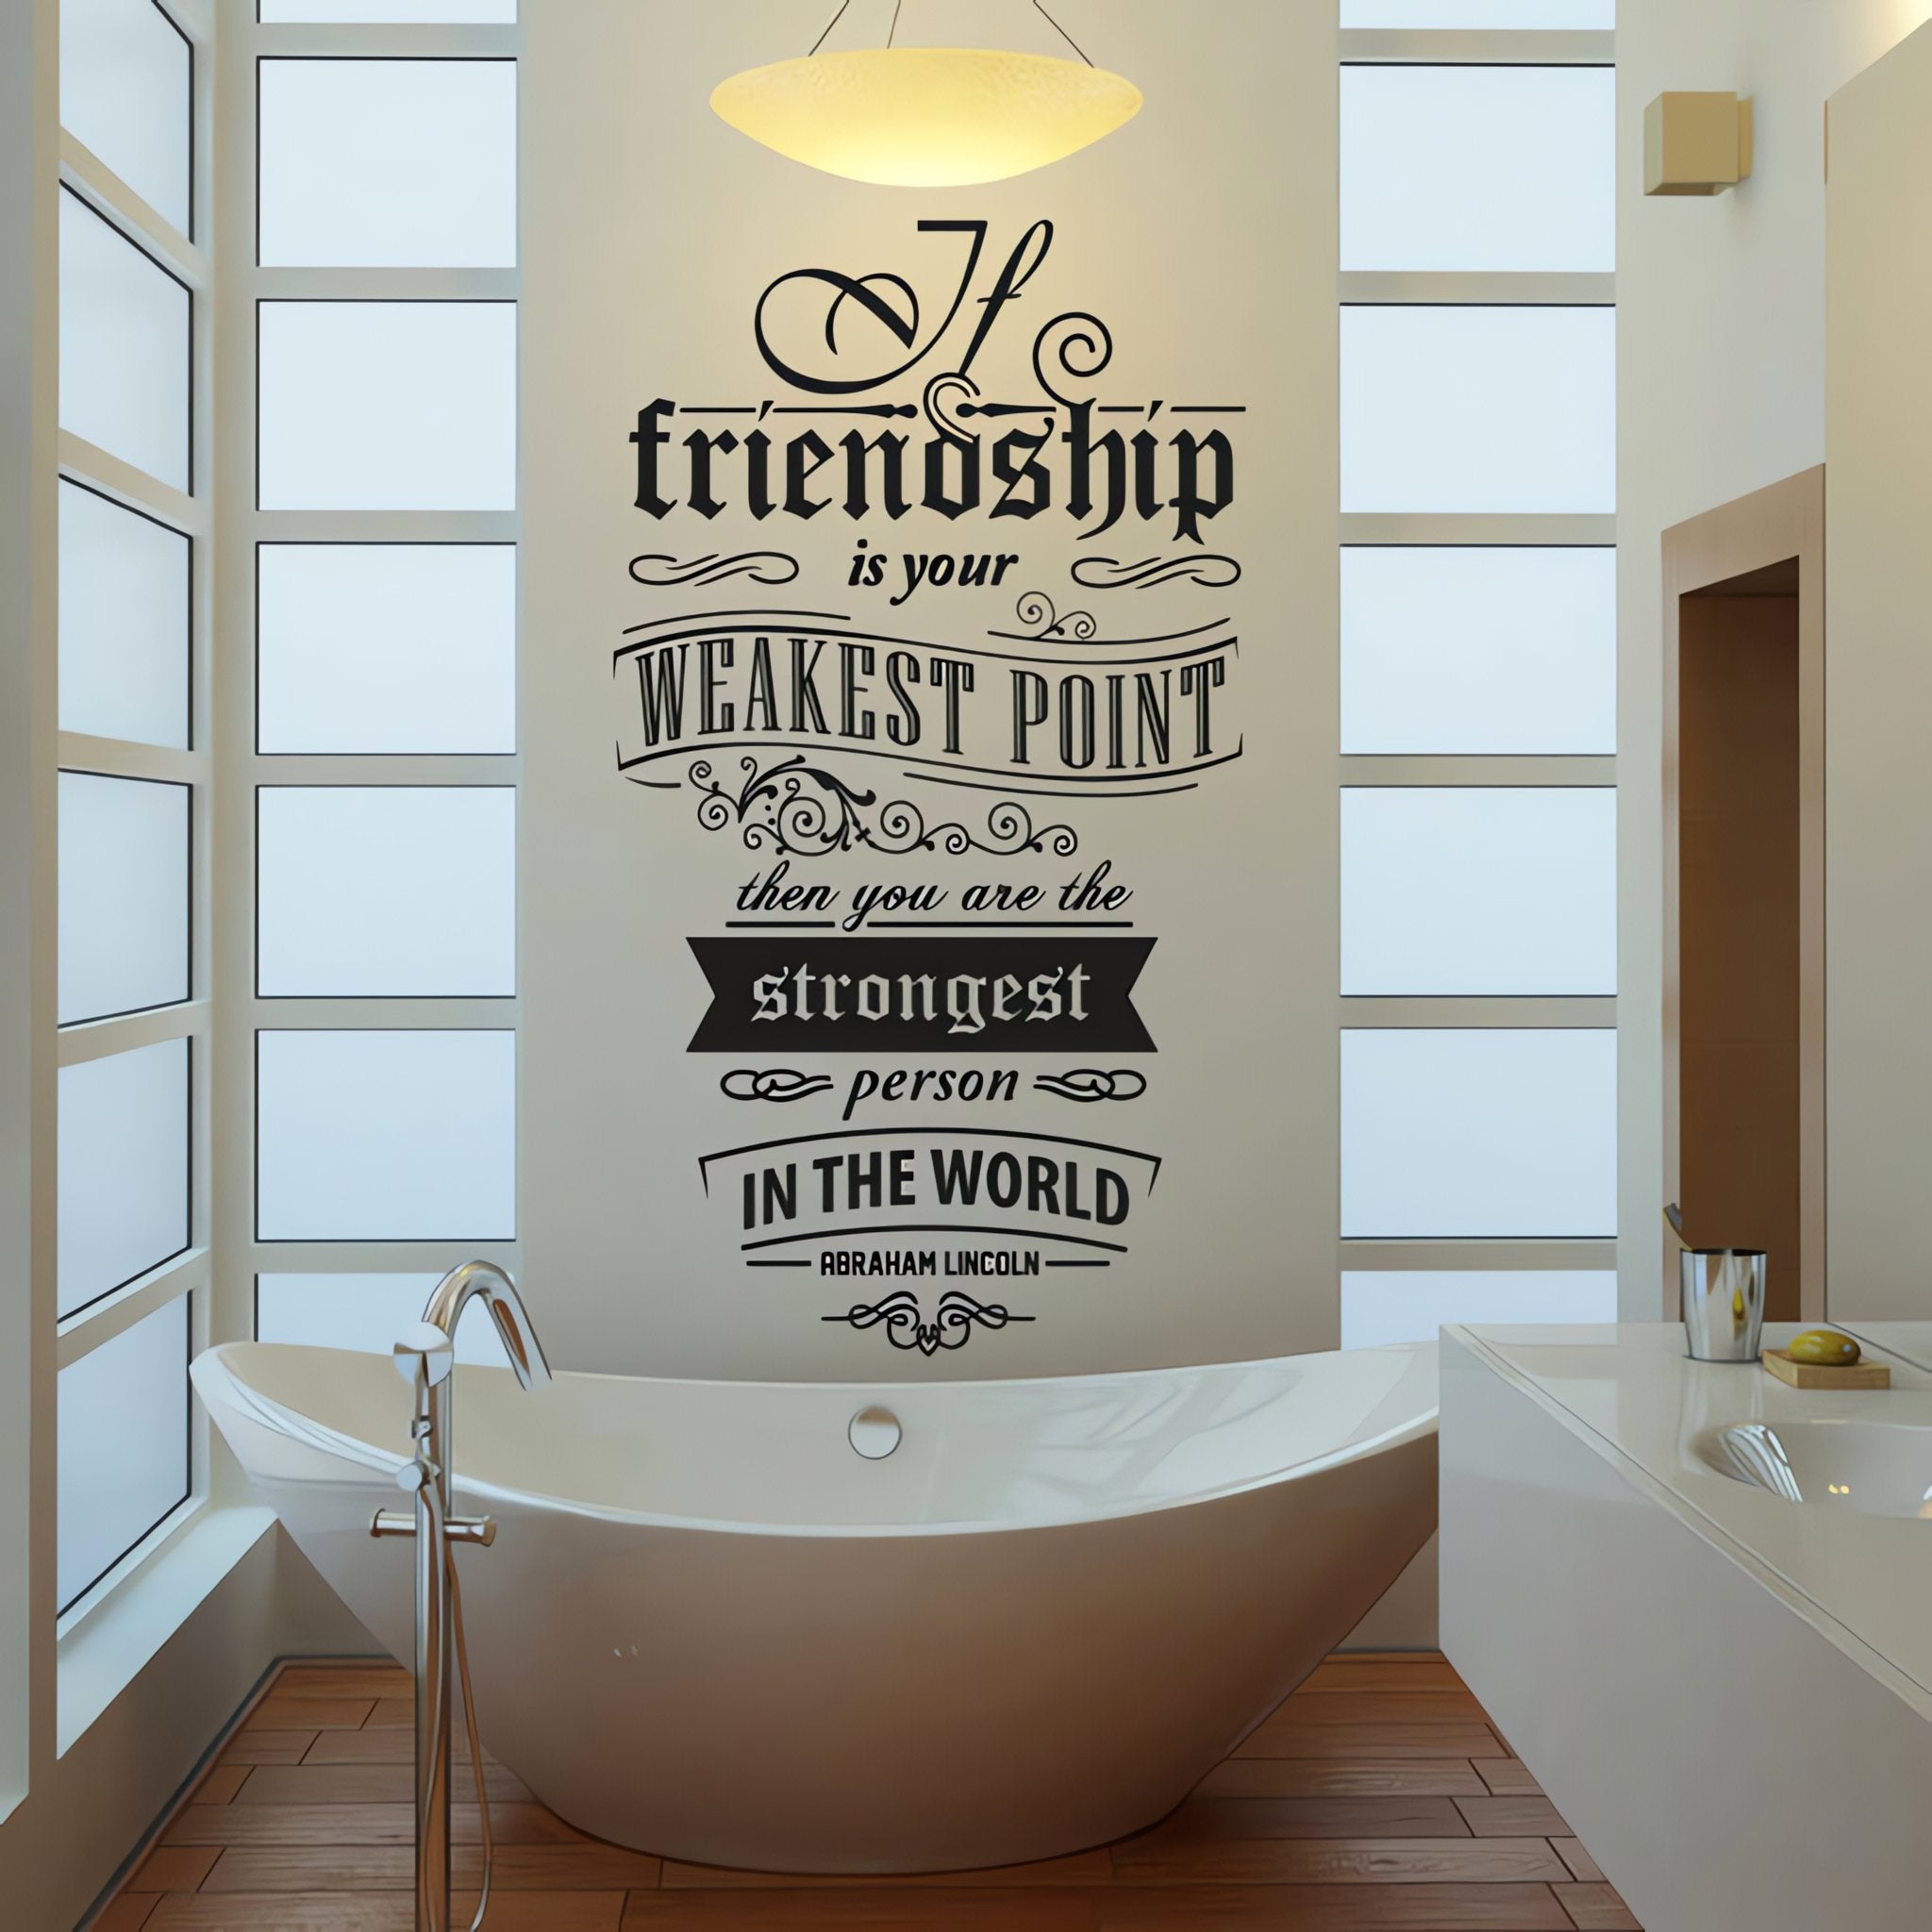 Wall quote sticker with text "If Friendship Is Your Weakest Point Then You Are The Strongest Person In The World" in a bathroom above a bathtub.